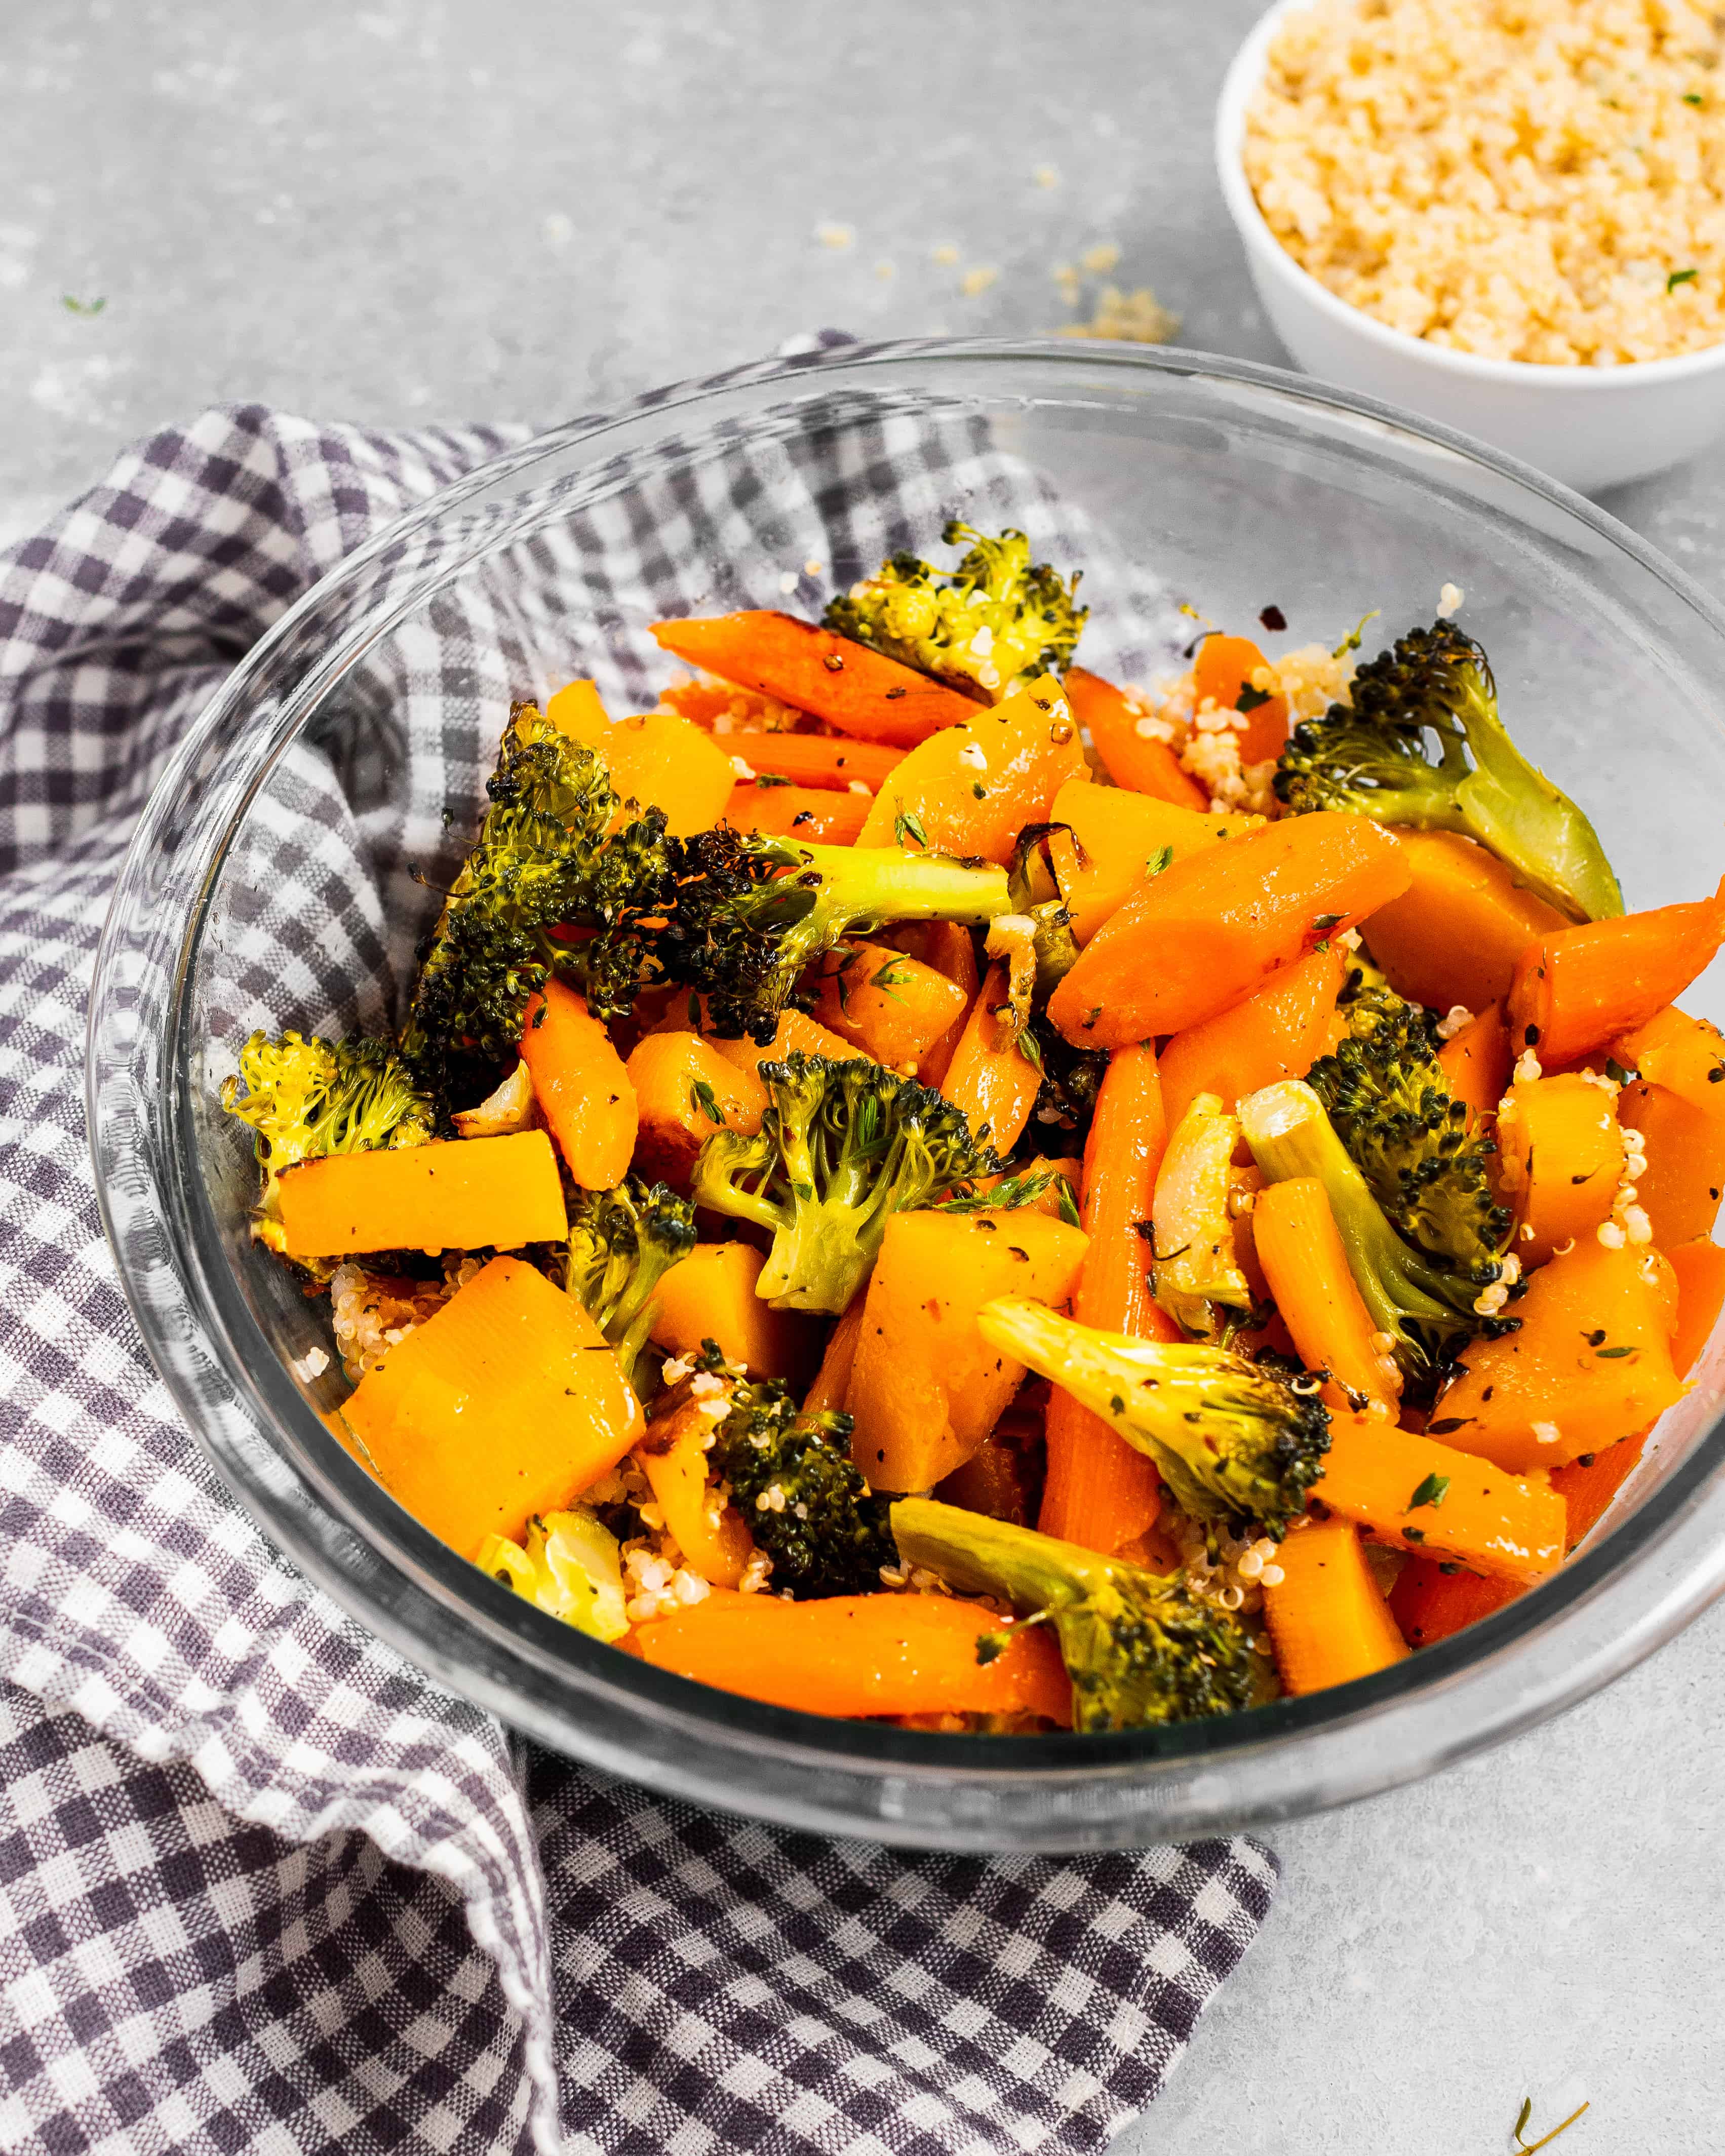 Roasted Winter Vegetable Medley with Quinoa